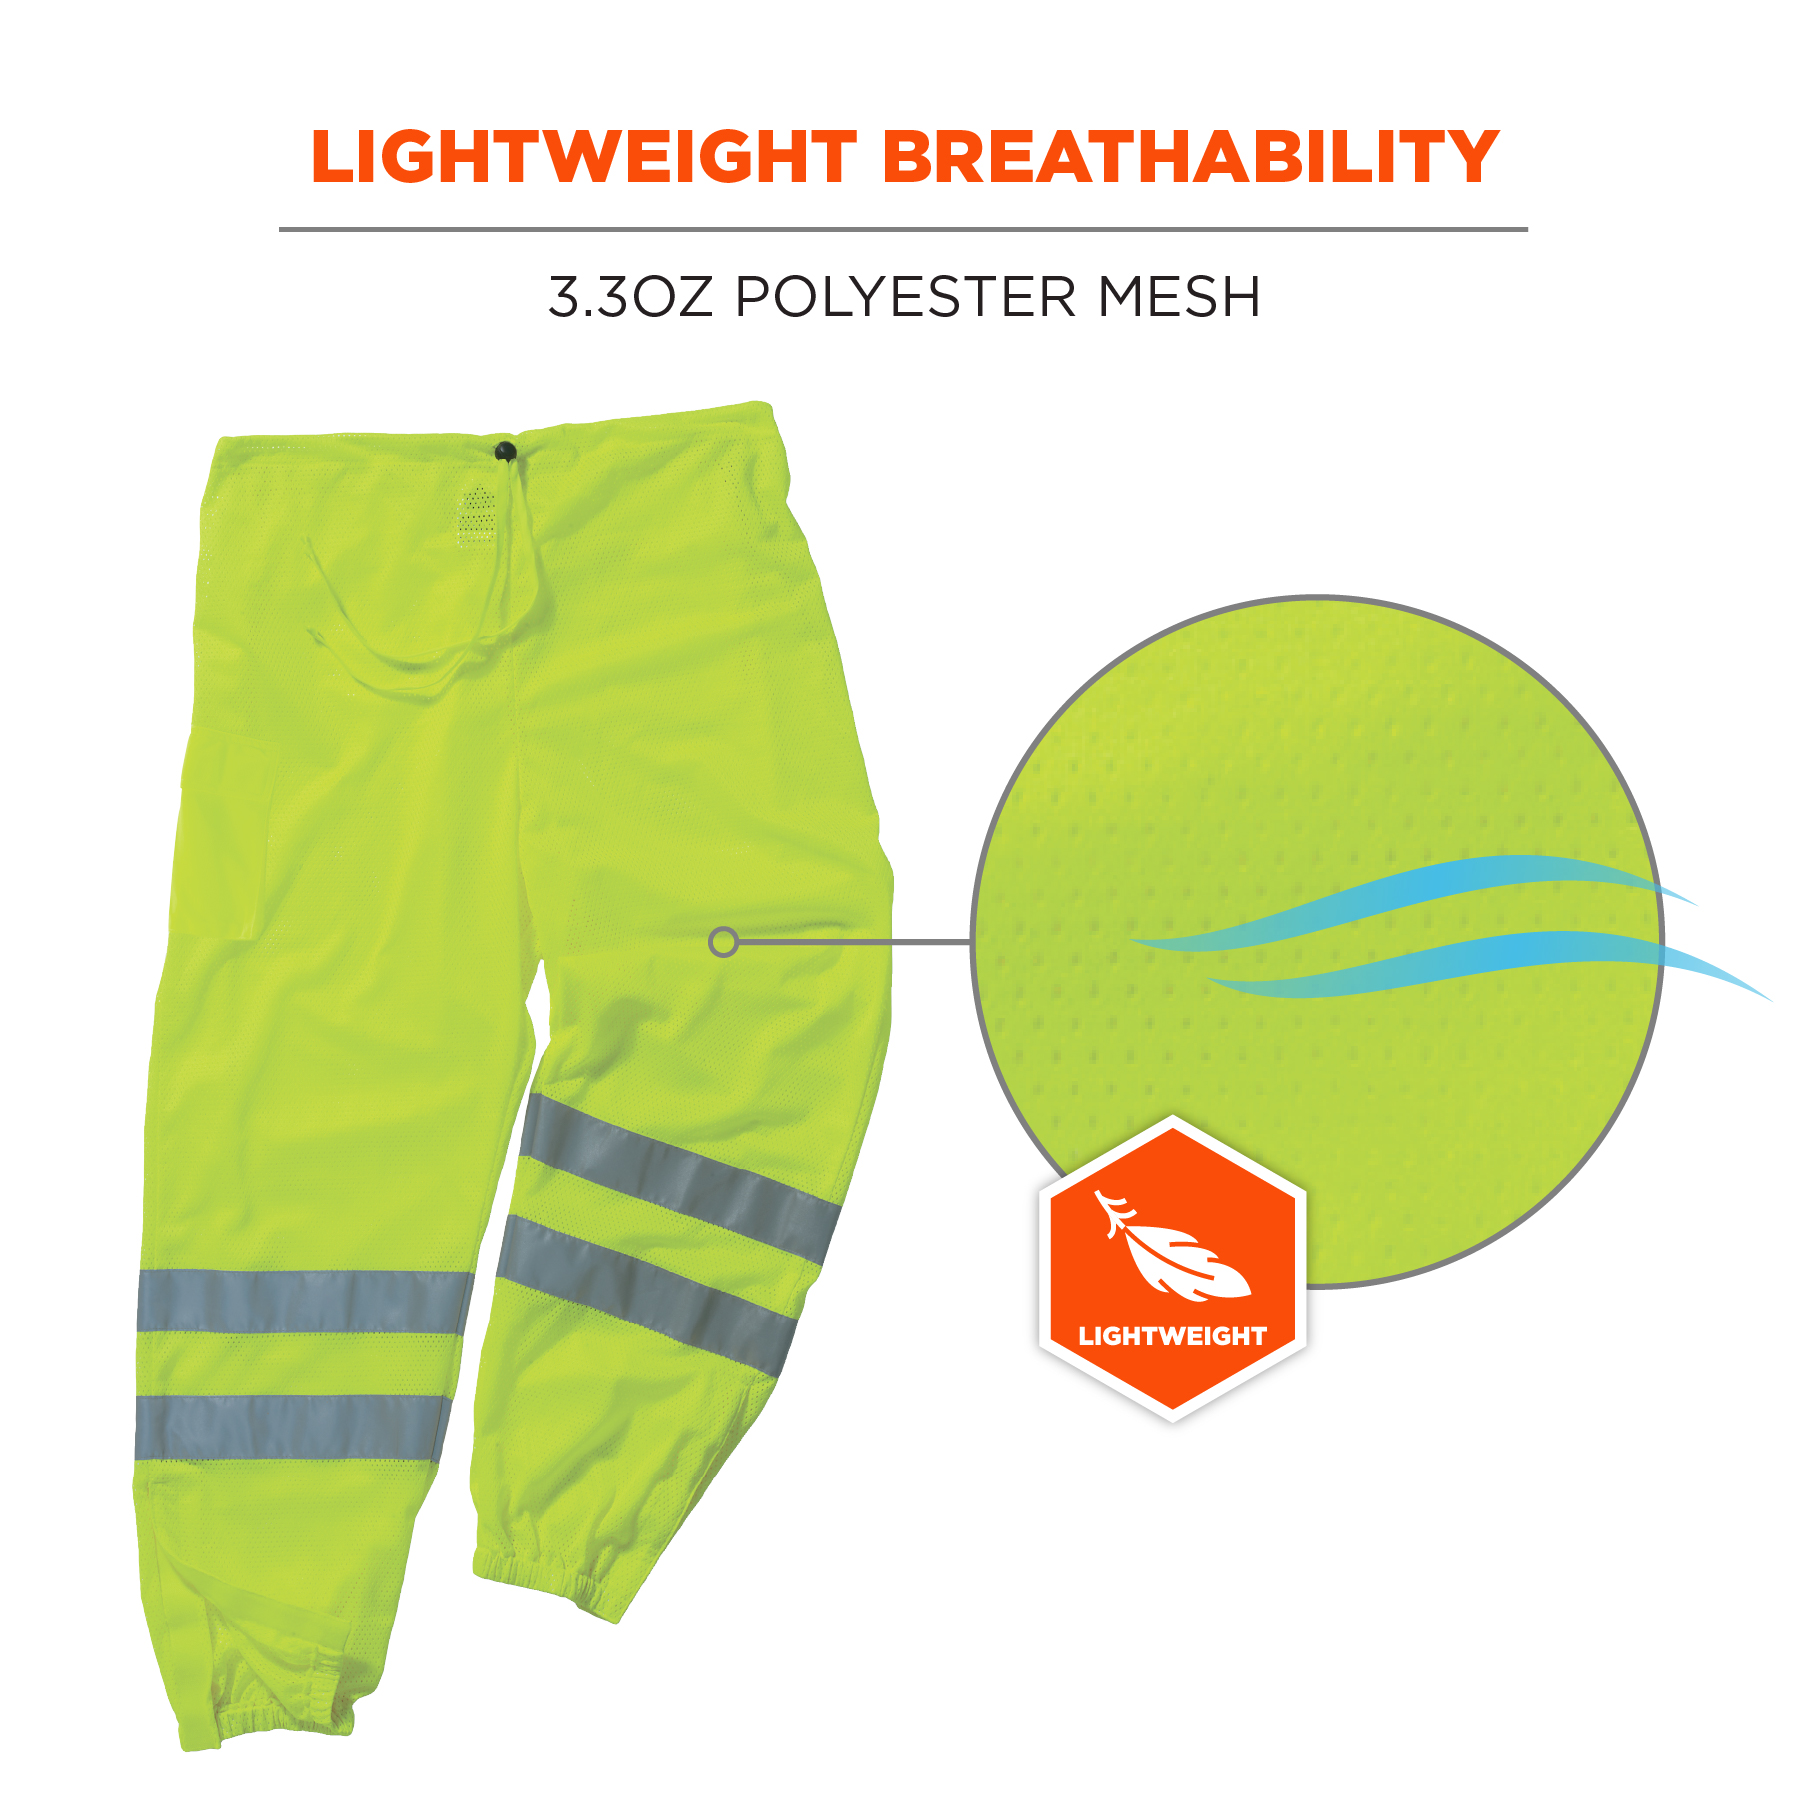 High-Vis Safety Pants & Reflective Work Pants FAQs